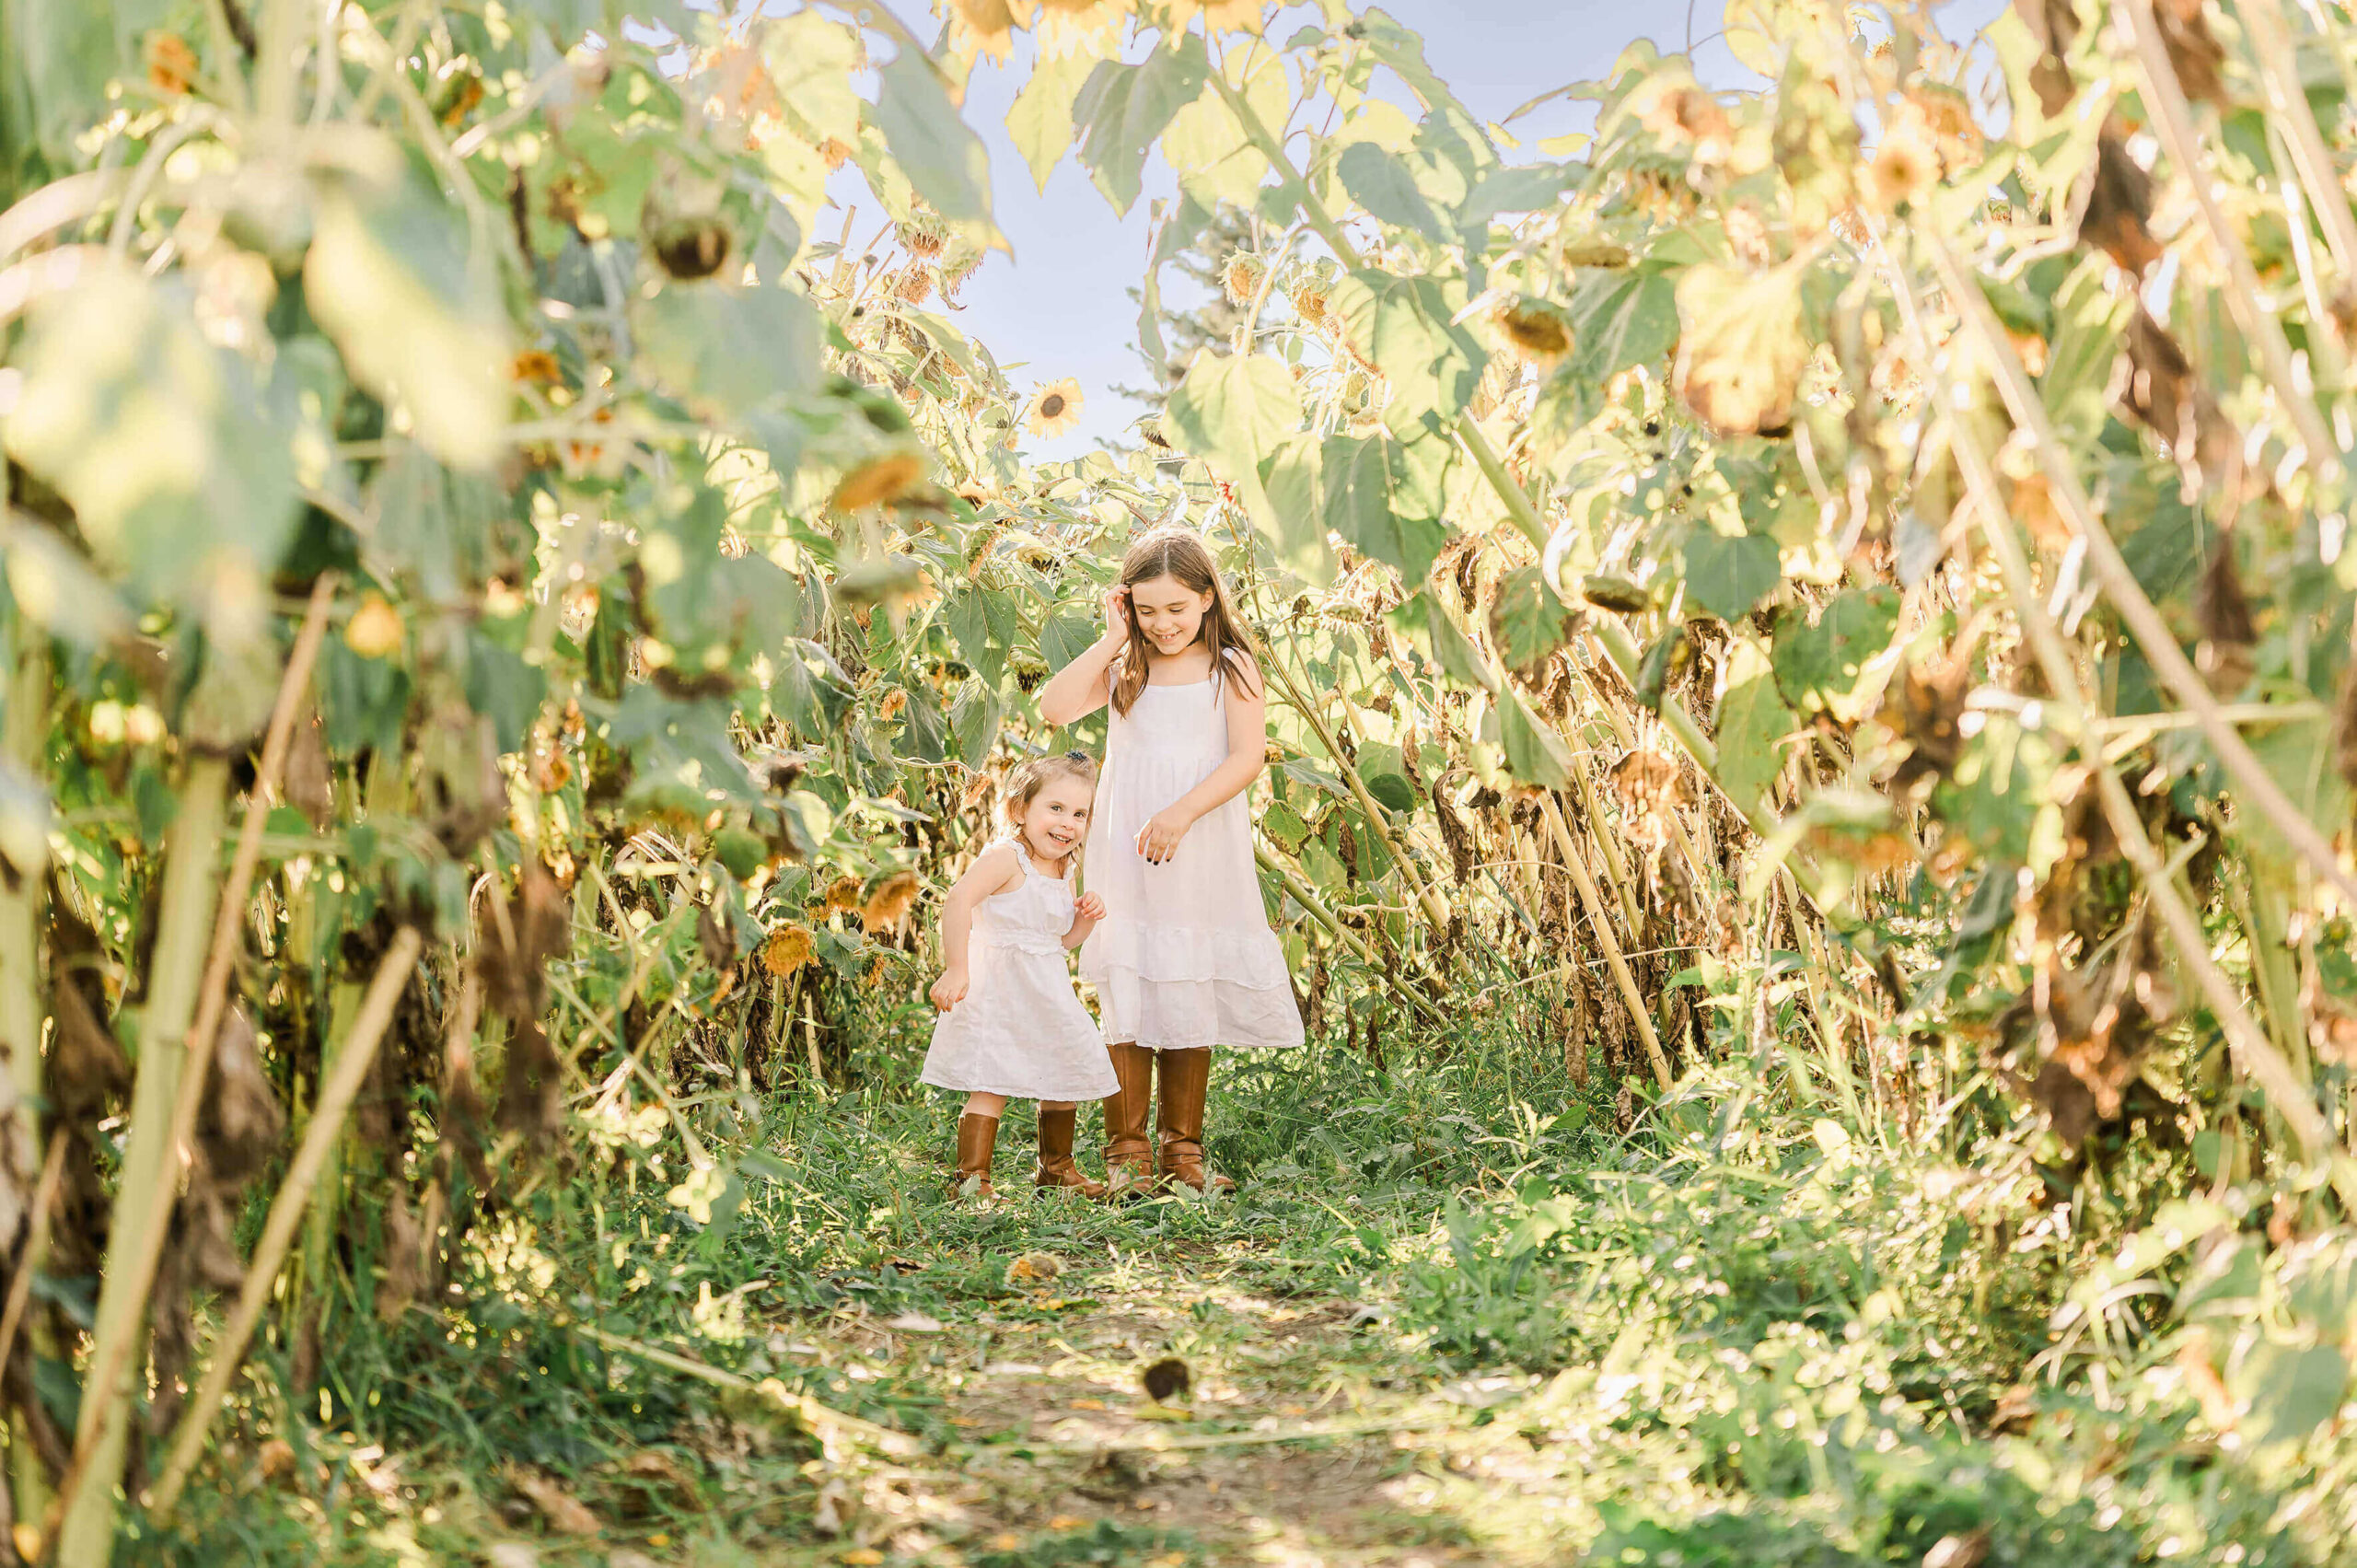 Sisters in summer white dresses having fun in a sunflower field during a family photography session as one of many fun Edmonton Summer Activities to do in Sherwood Park